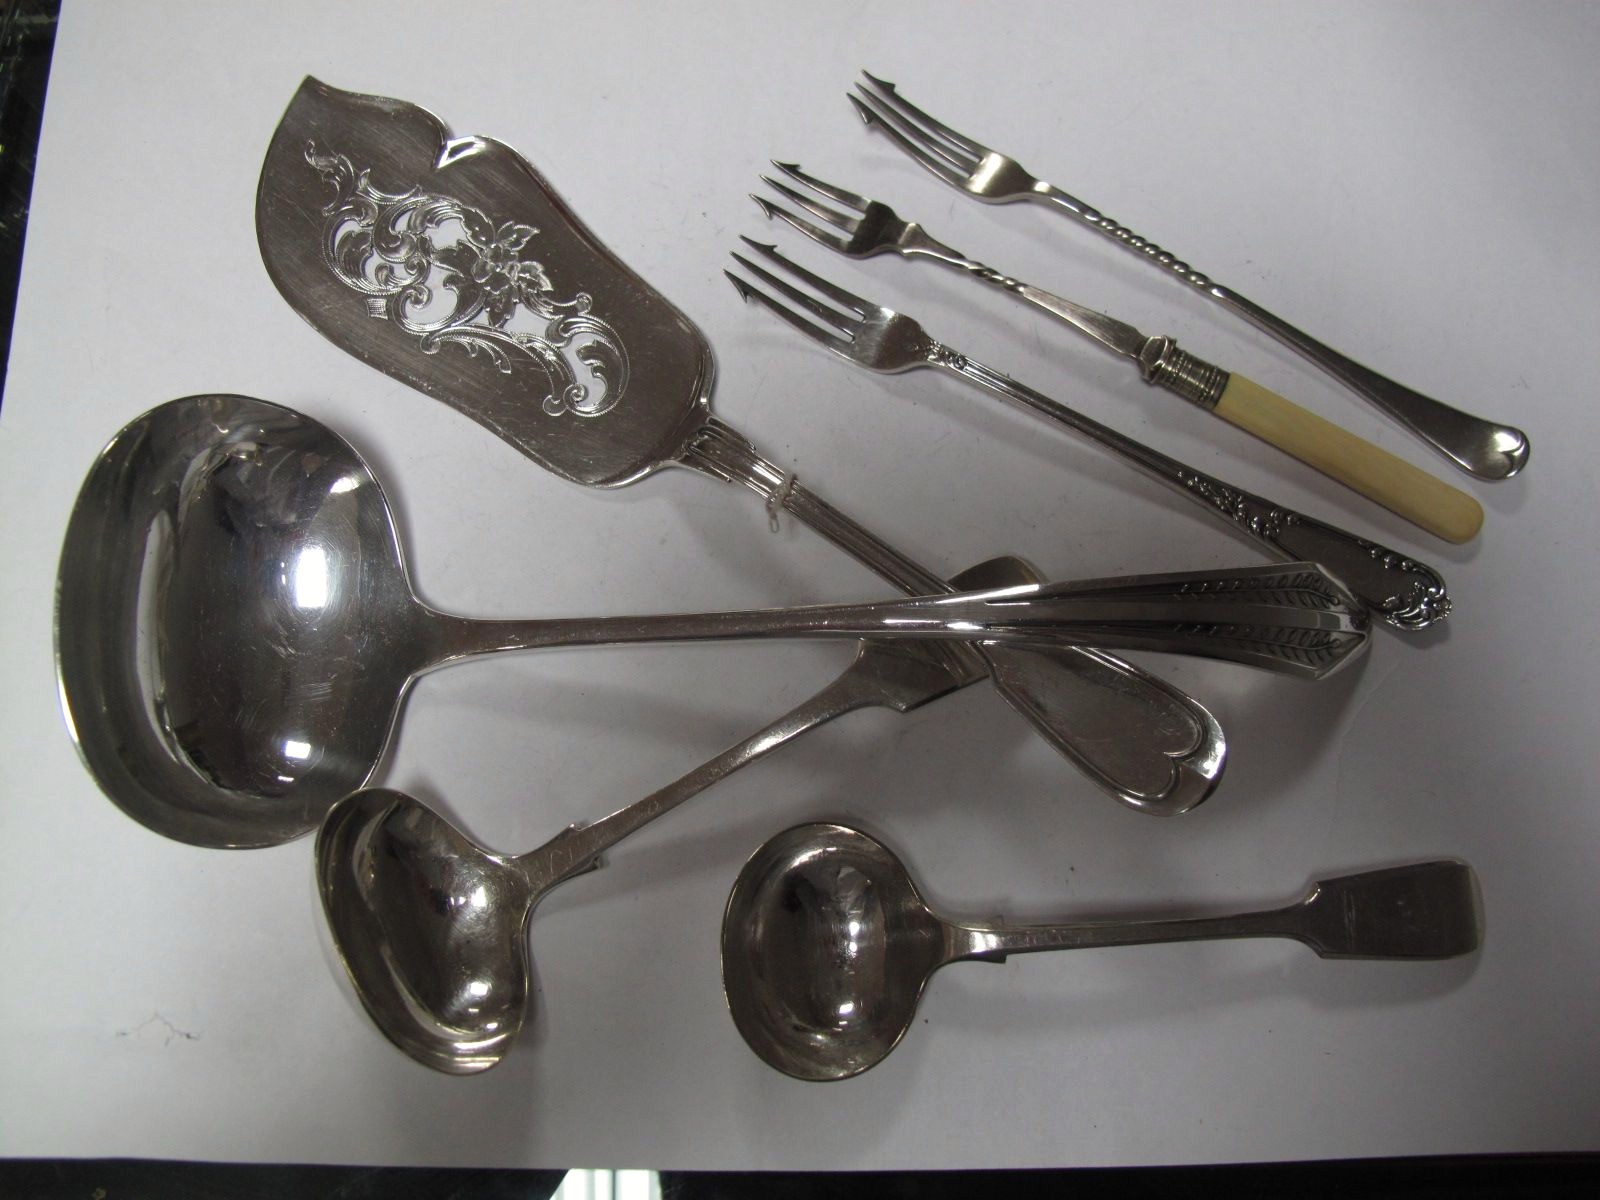 Art Krupp Berndorf Plated Fiddle and Thread Pattern Fish Slice, together with a ladle, sauce